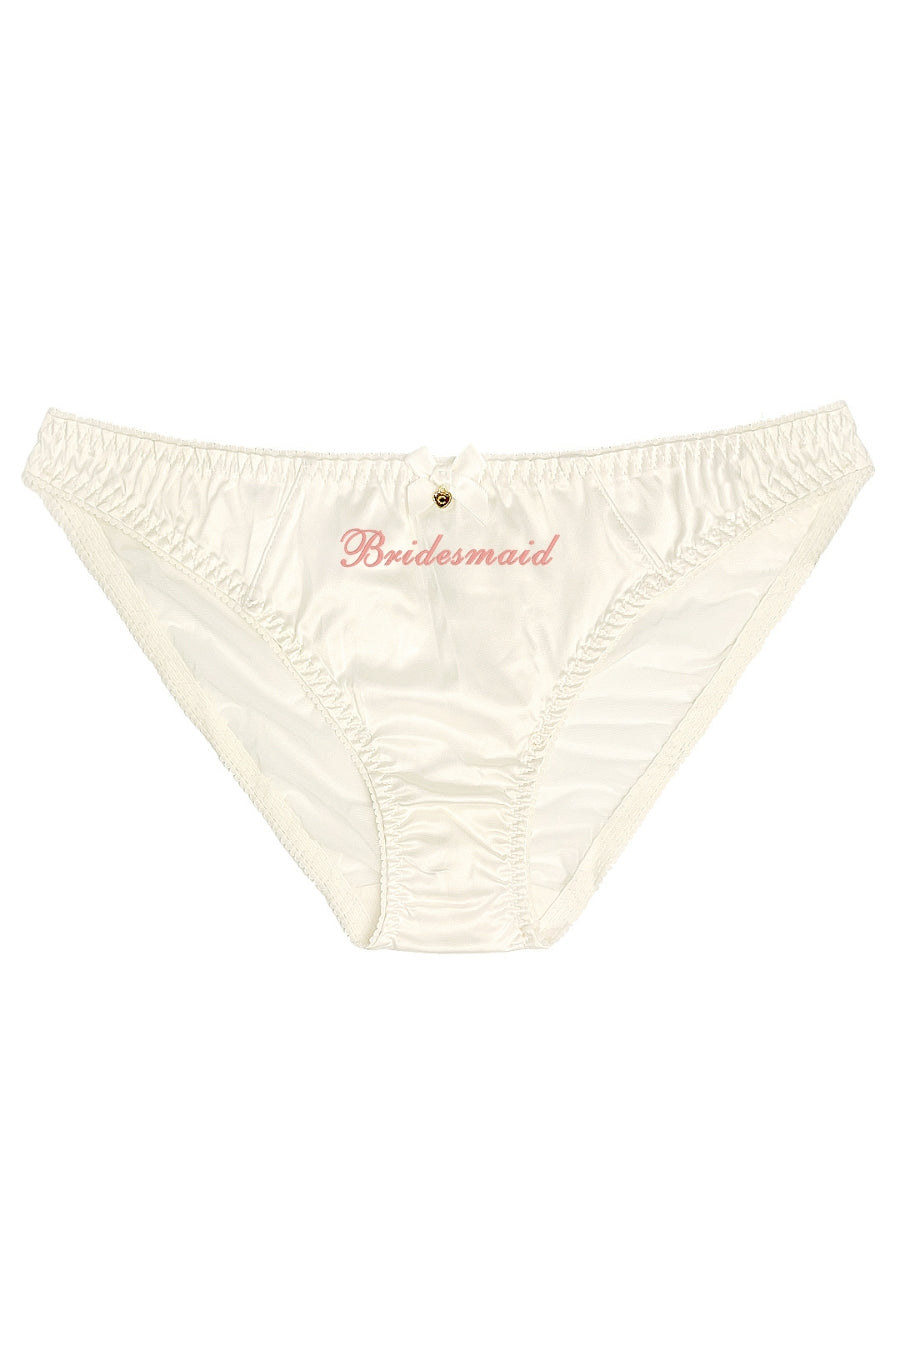 Bridesmaid: Embroidered Knickers